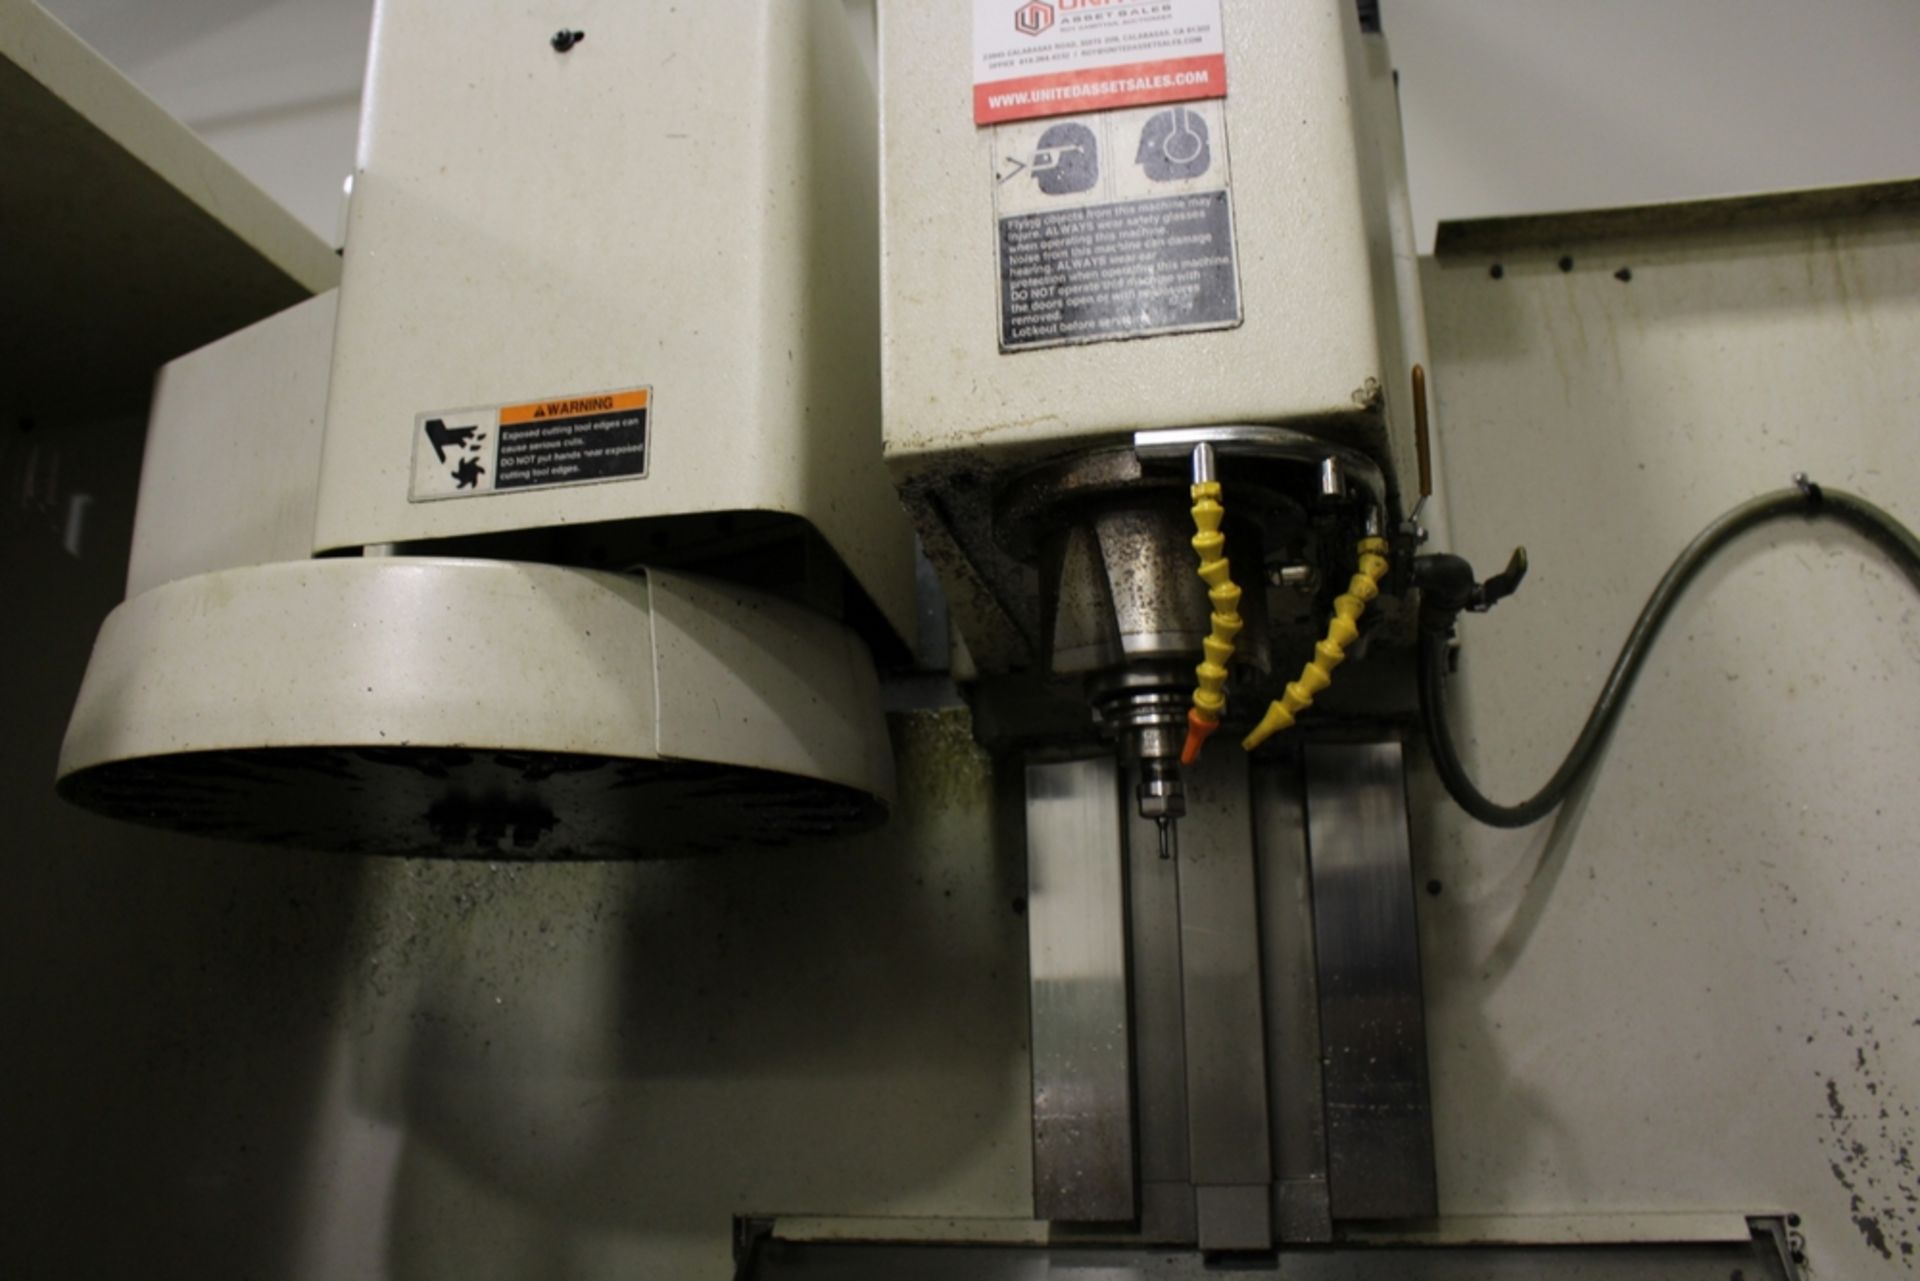 2001 FADAL MODEL 906 VERTICAL MACHINING CENTER, 4020HT, S/N 032001042337, 10,000 RPM SPINDLE, COOL - Image 6 of 7